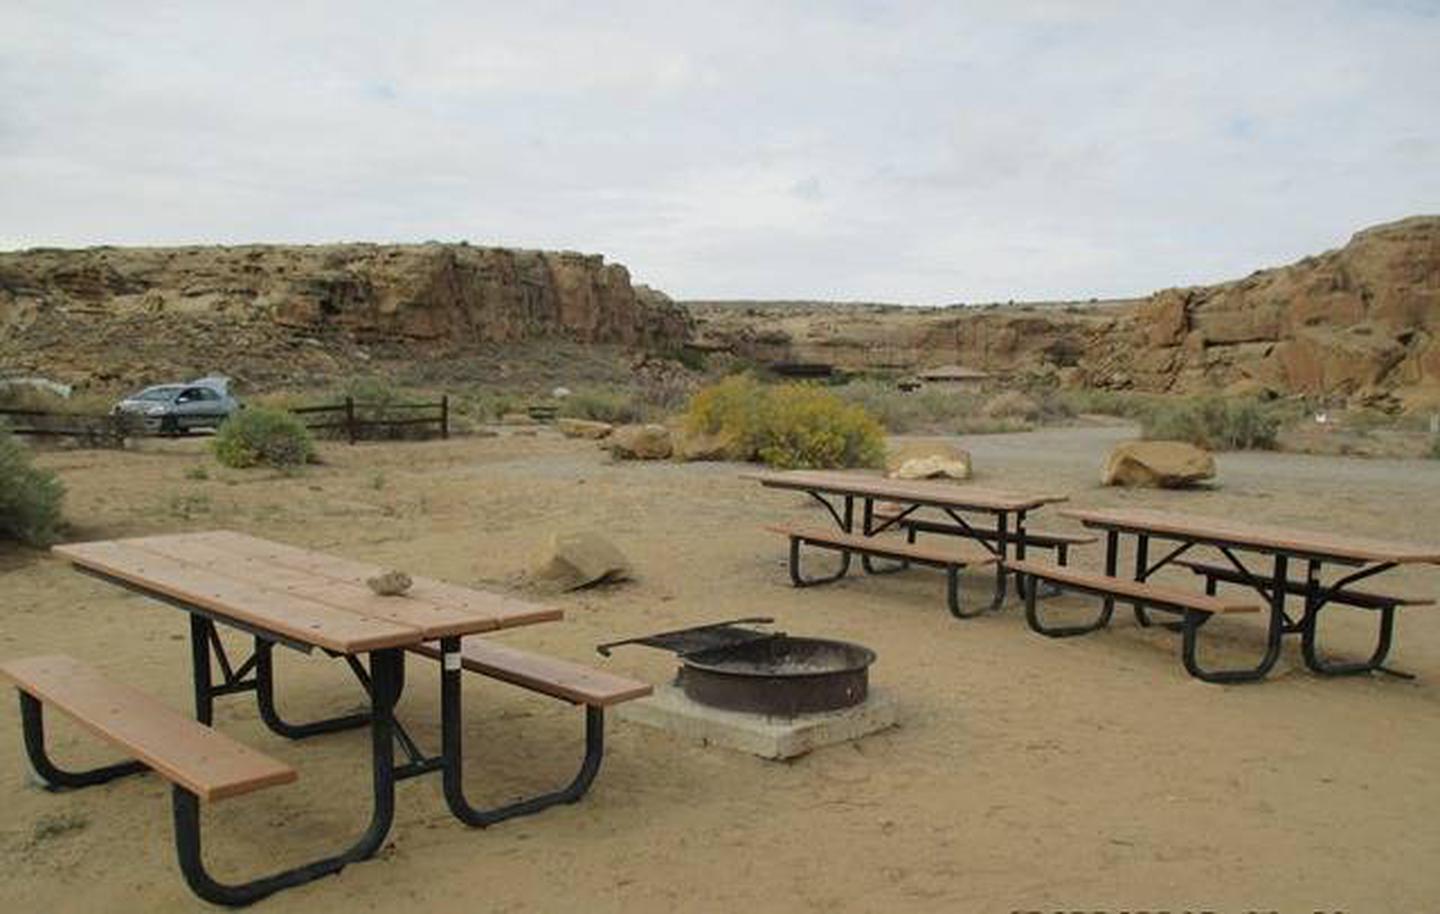 Picnic tables, fire grate and tent pads availablePicnic tables, fire grate and tent pads available in group campsite. Group leader must check in at Visitor Center upon arrival